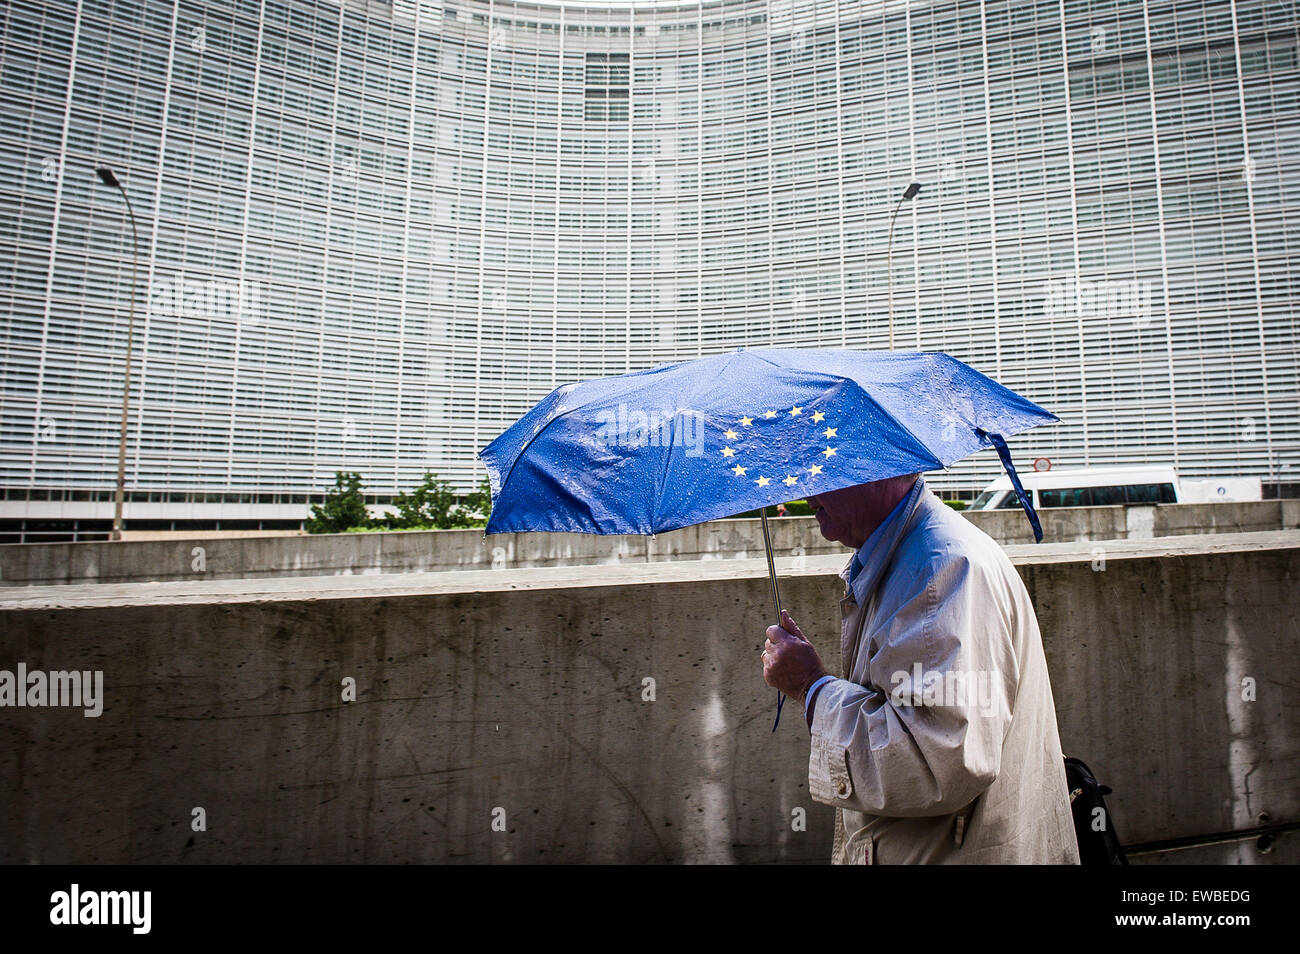 Brussels, Bxl, Belgium. 22nd June, 2015. Pedestrian under umbrella with European Union flag is walking along European Commission headquarters building in Brussels, Belgium on 22.06.2015 Heads of Eurozone state will geather for emergency summit on Greek debt today in EU headquarters by Wiktor Dabkowski © Wiktor Dabkowski/ZUMA Wire/Alamy Live News Stock Photo